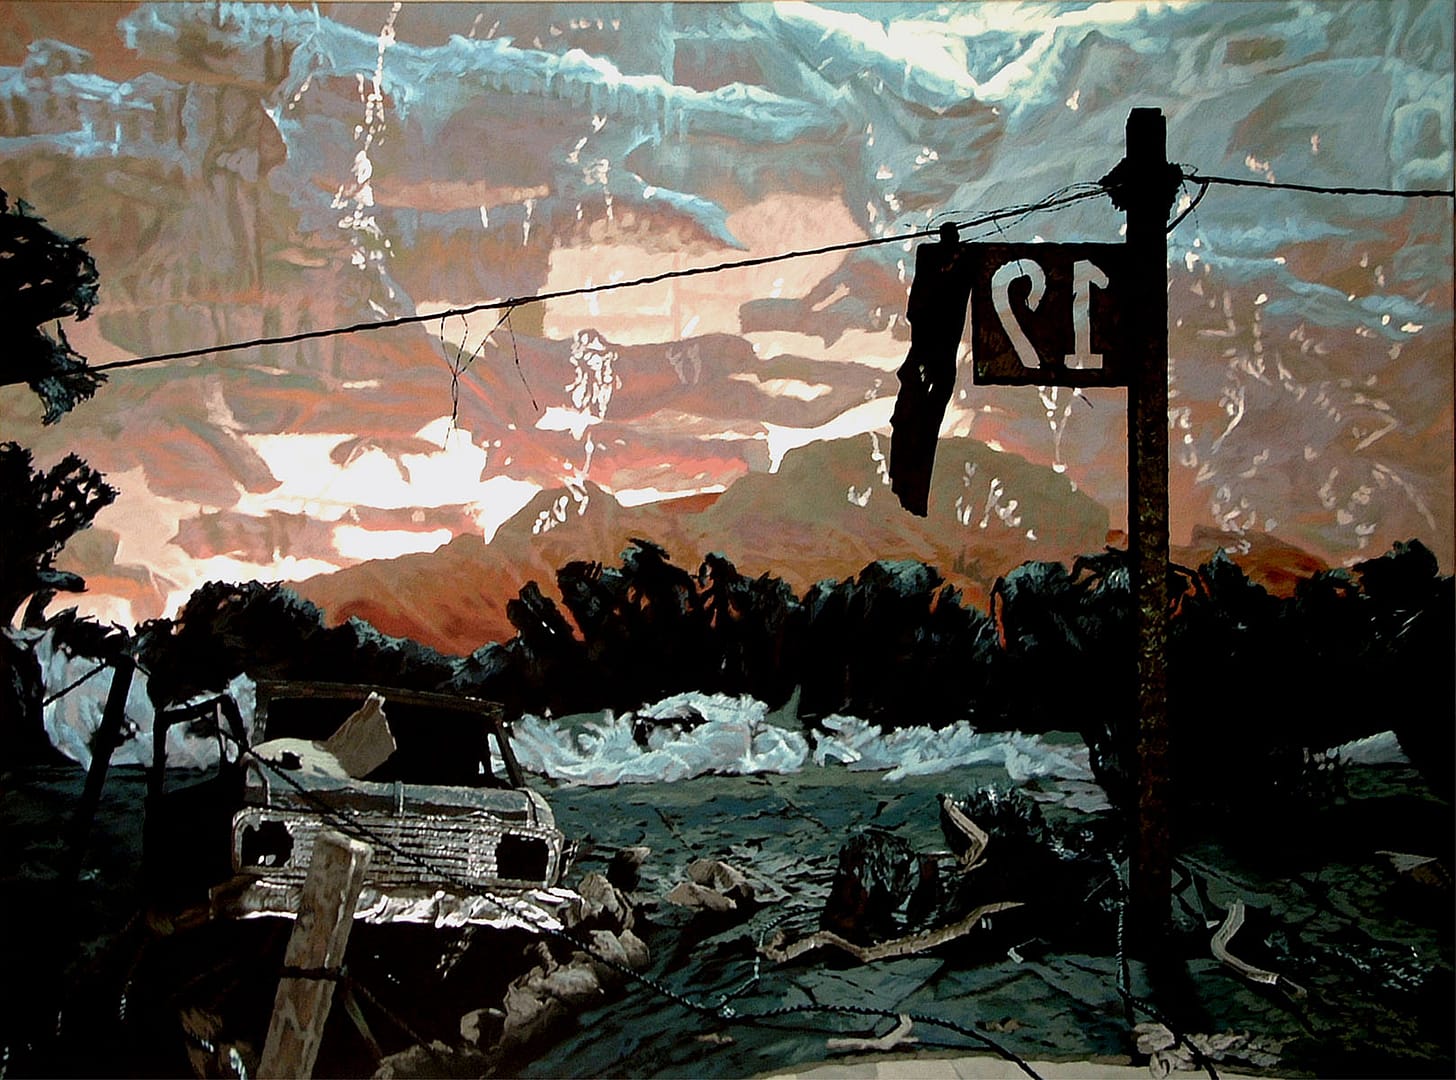 Tempera on canvas painting by Philipp Fröhlich showing a car wreck and a signpost in a barren landscape. Originally shown at the exhibition "Exvoto, Where is Nikki Black" at MUSAC museum, León